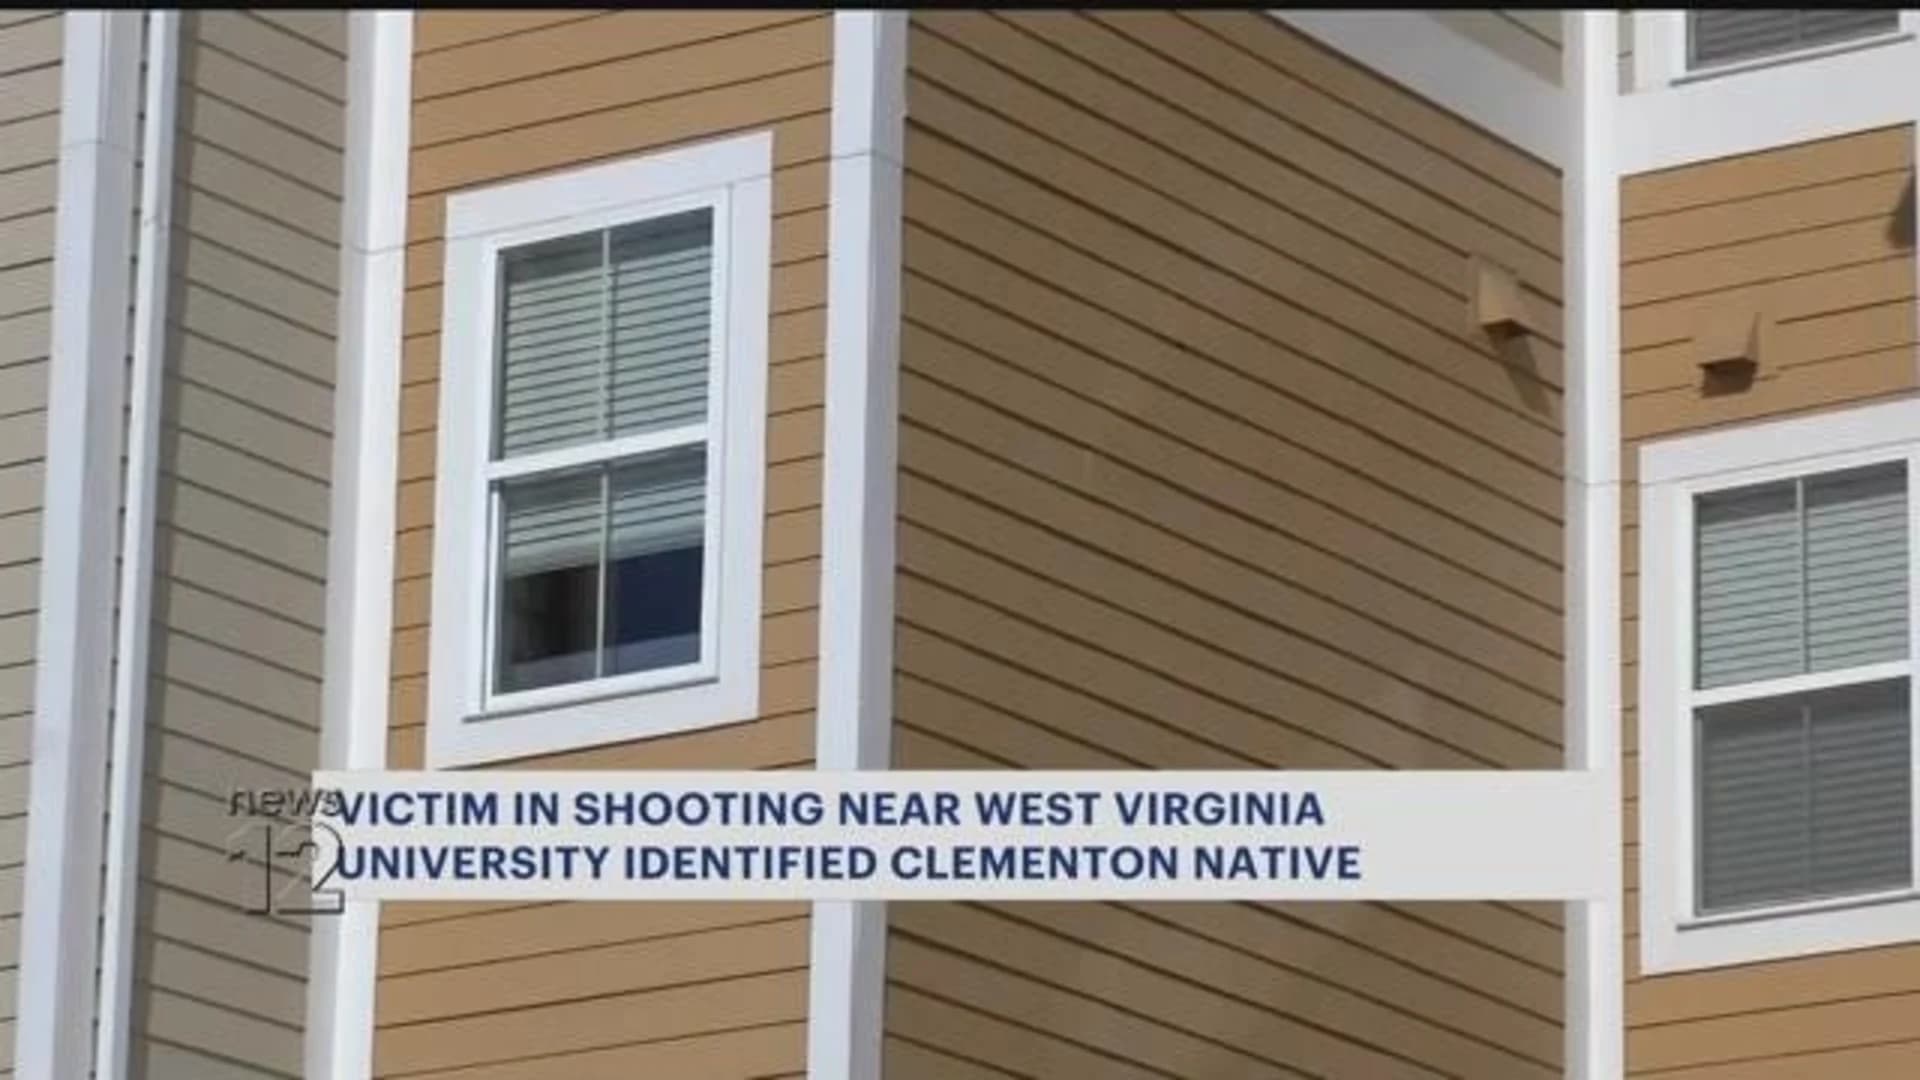 Student from NJ fatally shot at apartment complex near West Virginia University